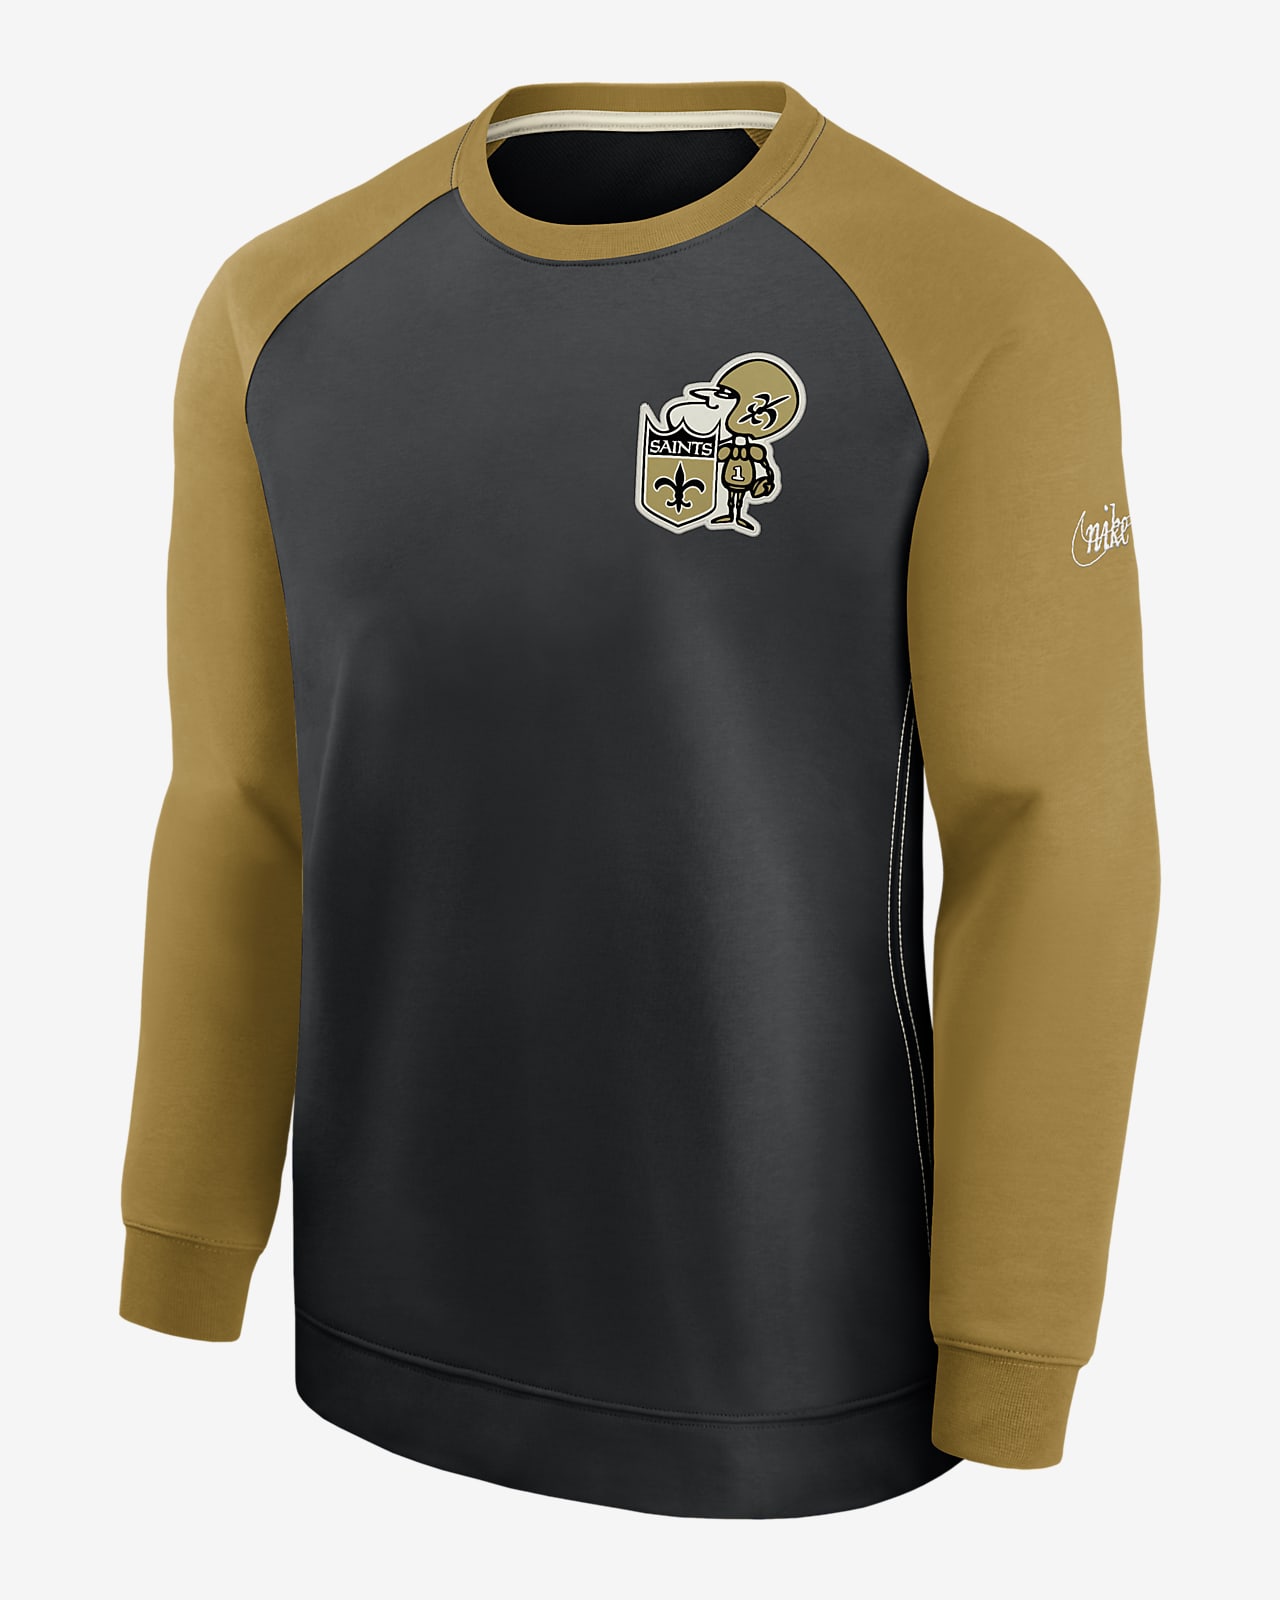 Nike Therma Athletic Stack (NFL New Orleans Saints) Men's Pullover